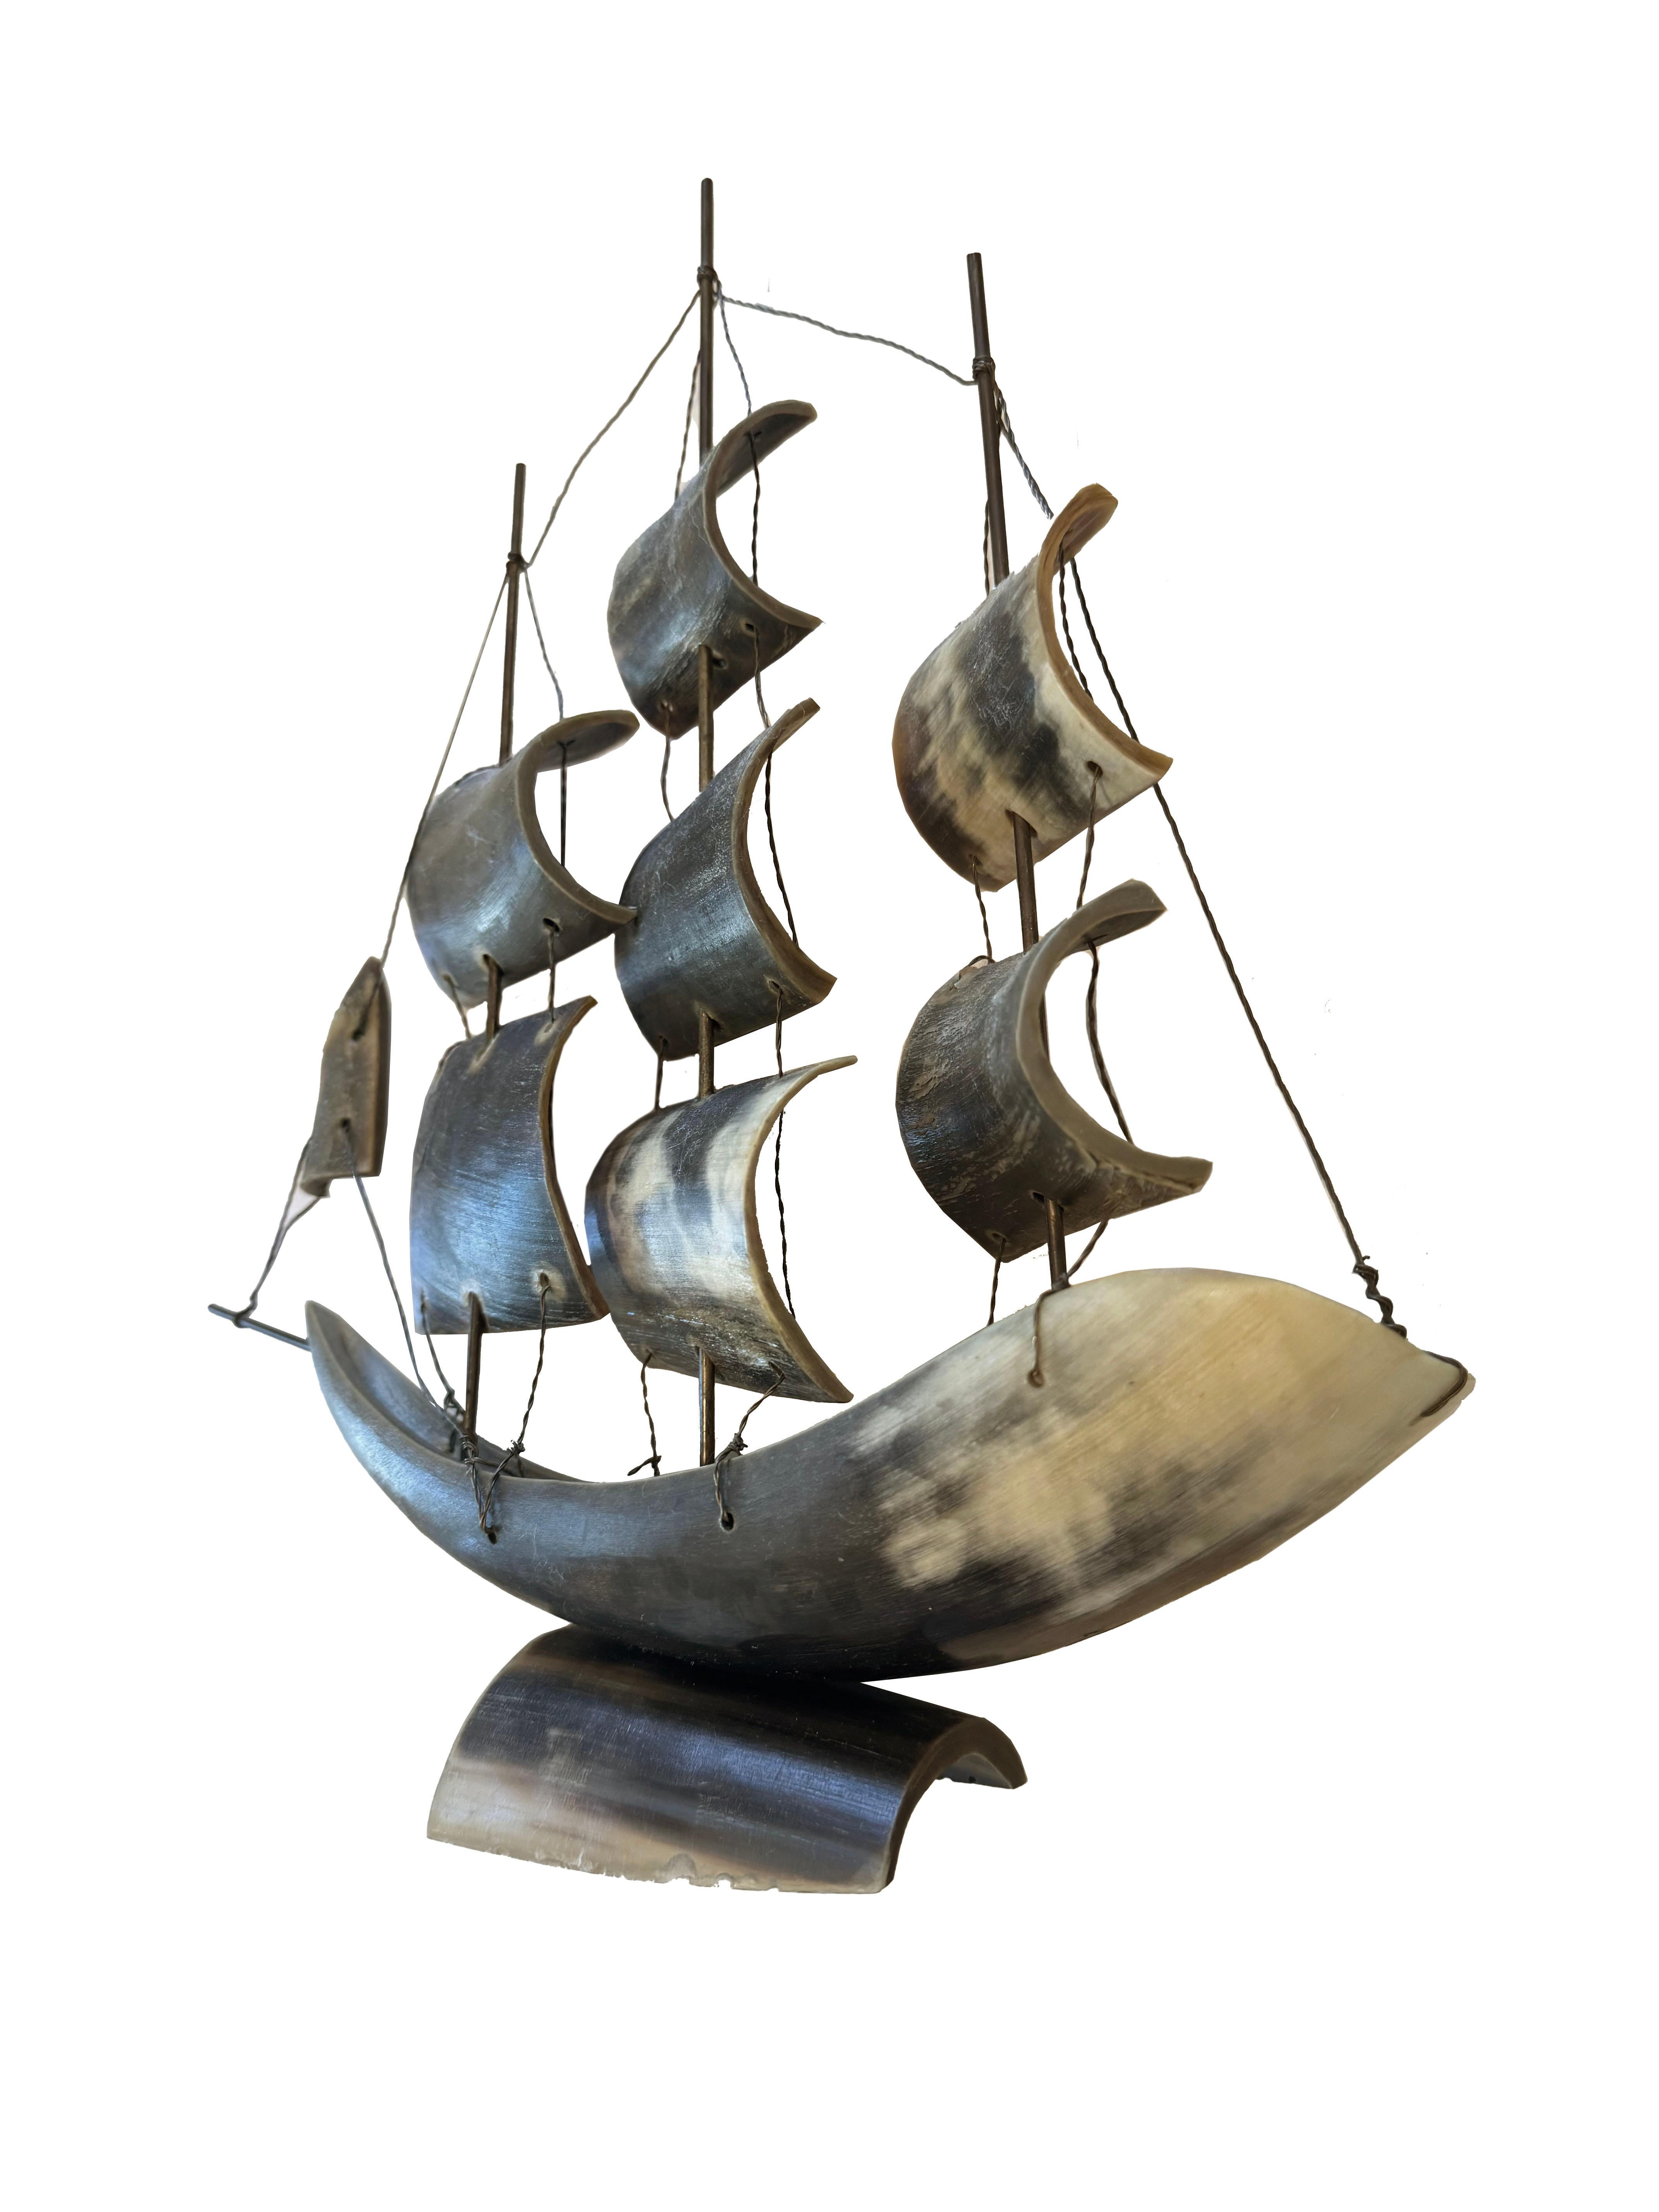 Set sail into a sea of style with this extraordinary mid-century style horn ship or sailboat accessory, a piece that promises to captivate and intrigue. This unique item is an artful fusion of natural beauty and mid-century modern design, featuring